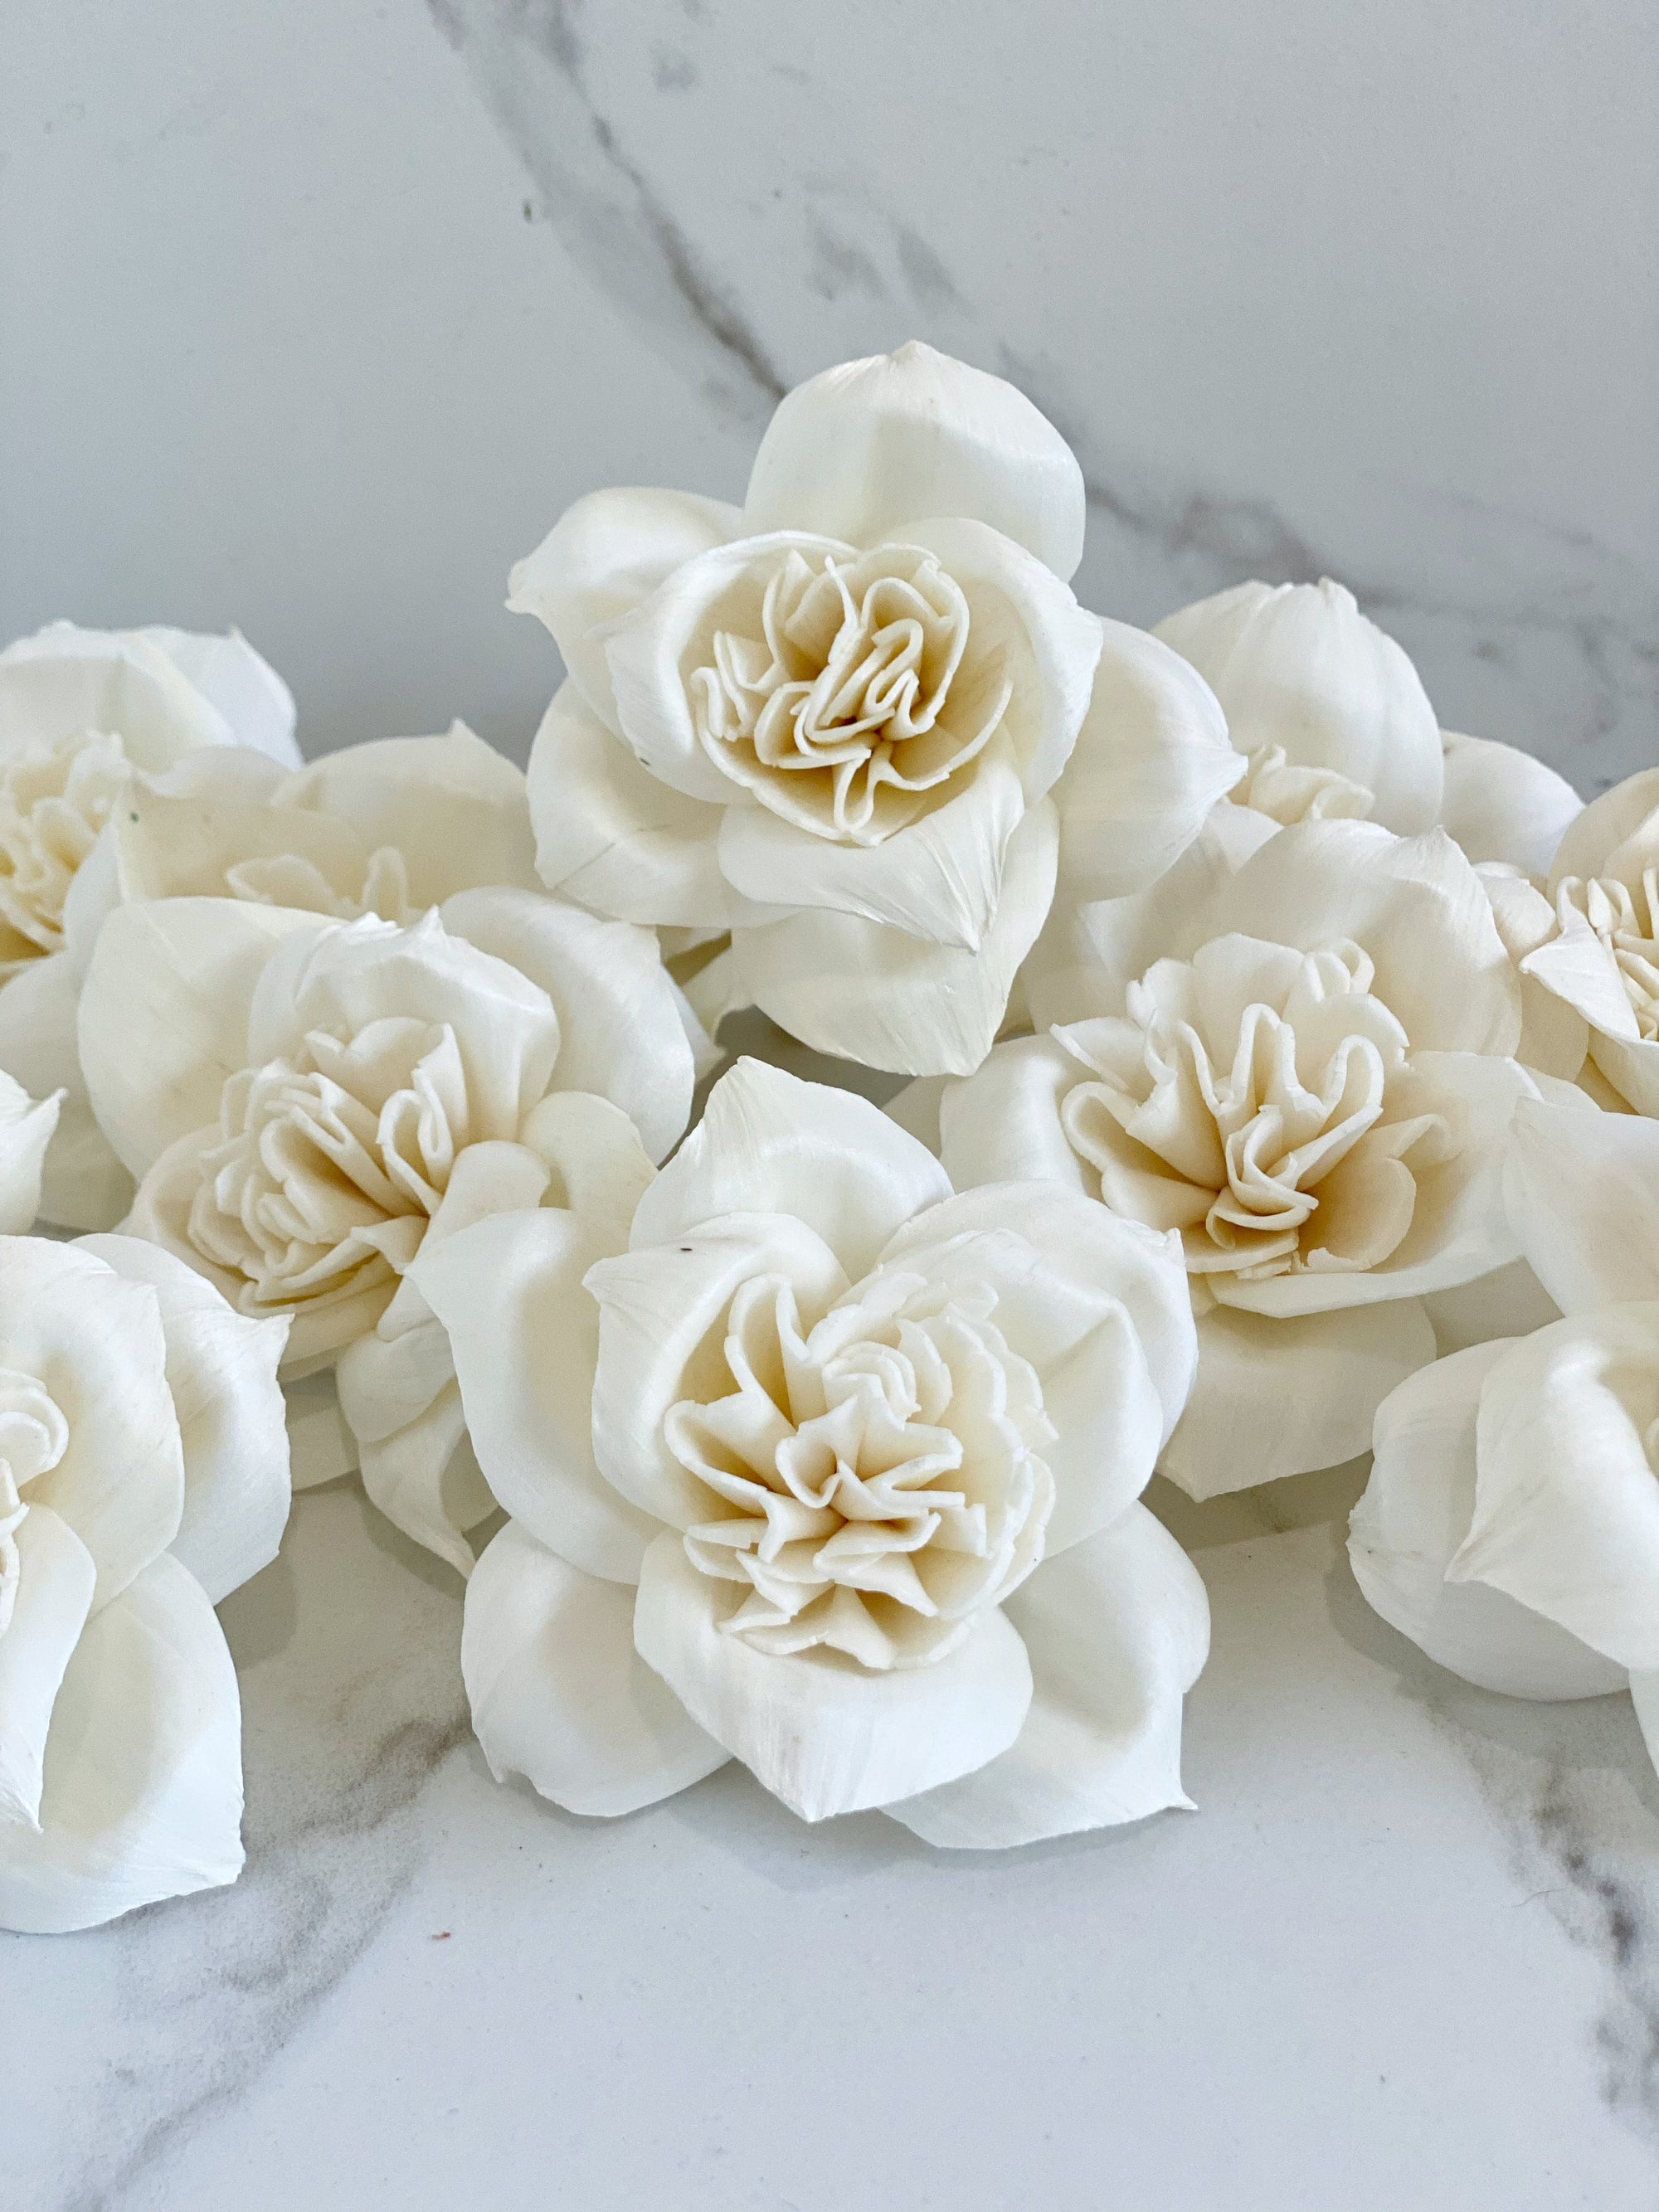 Damask ™ | set of 12 | 2.5 inches